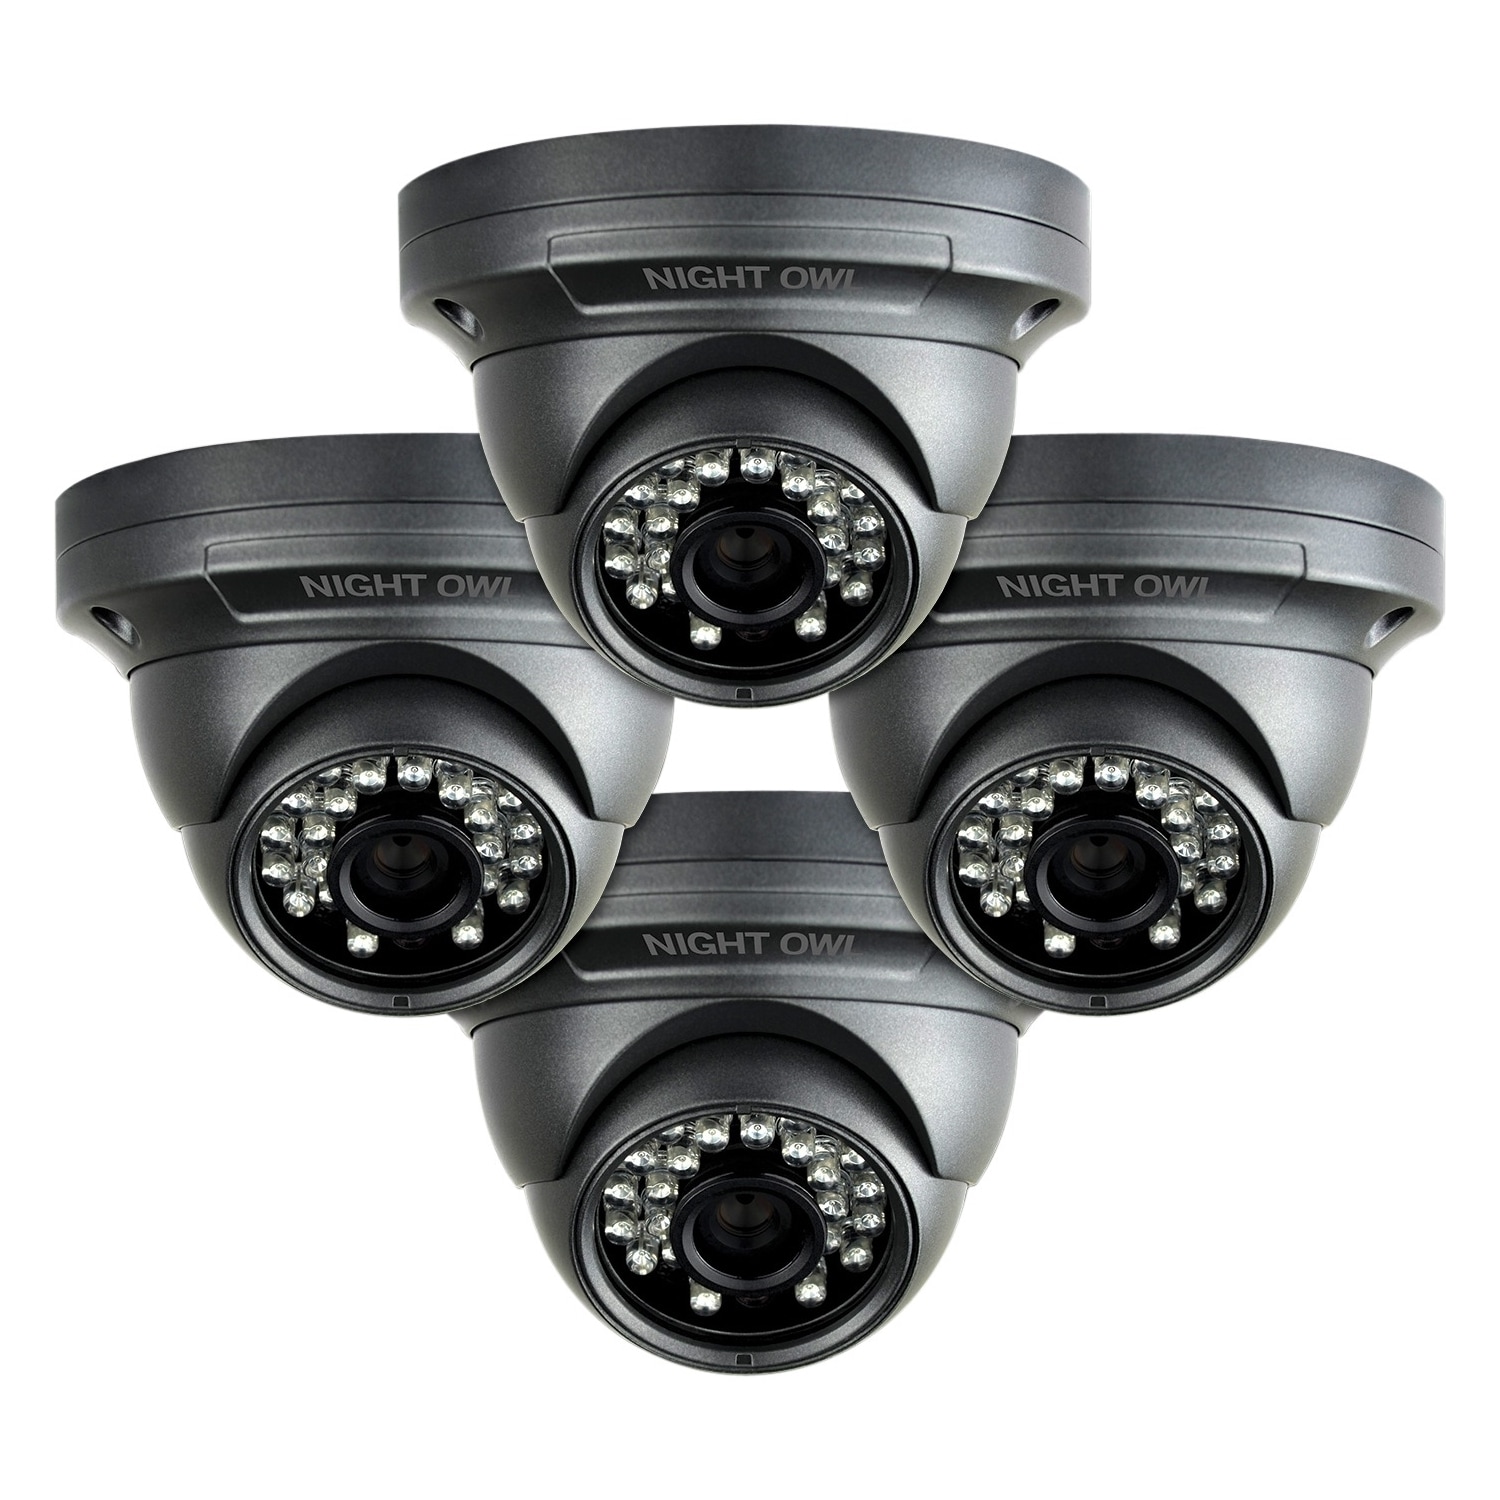 5mp dome camera for night owl security system